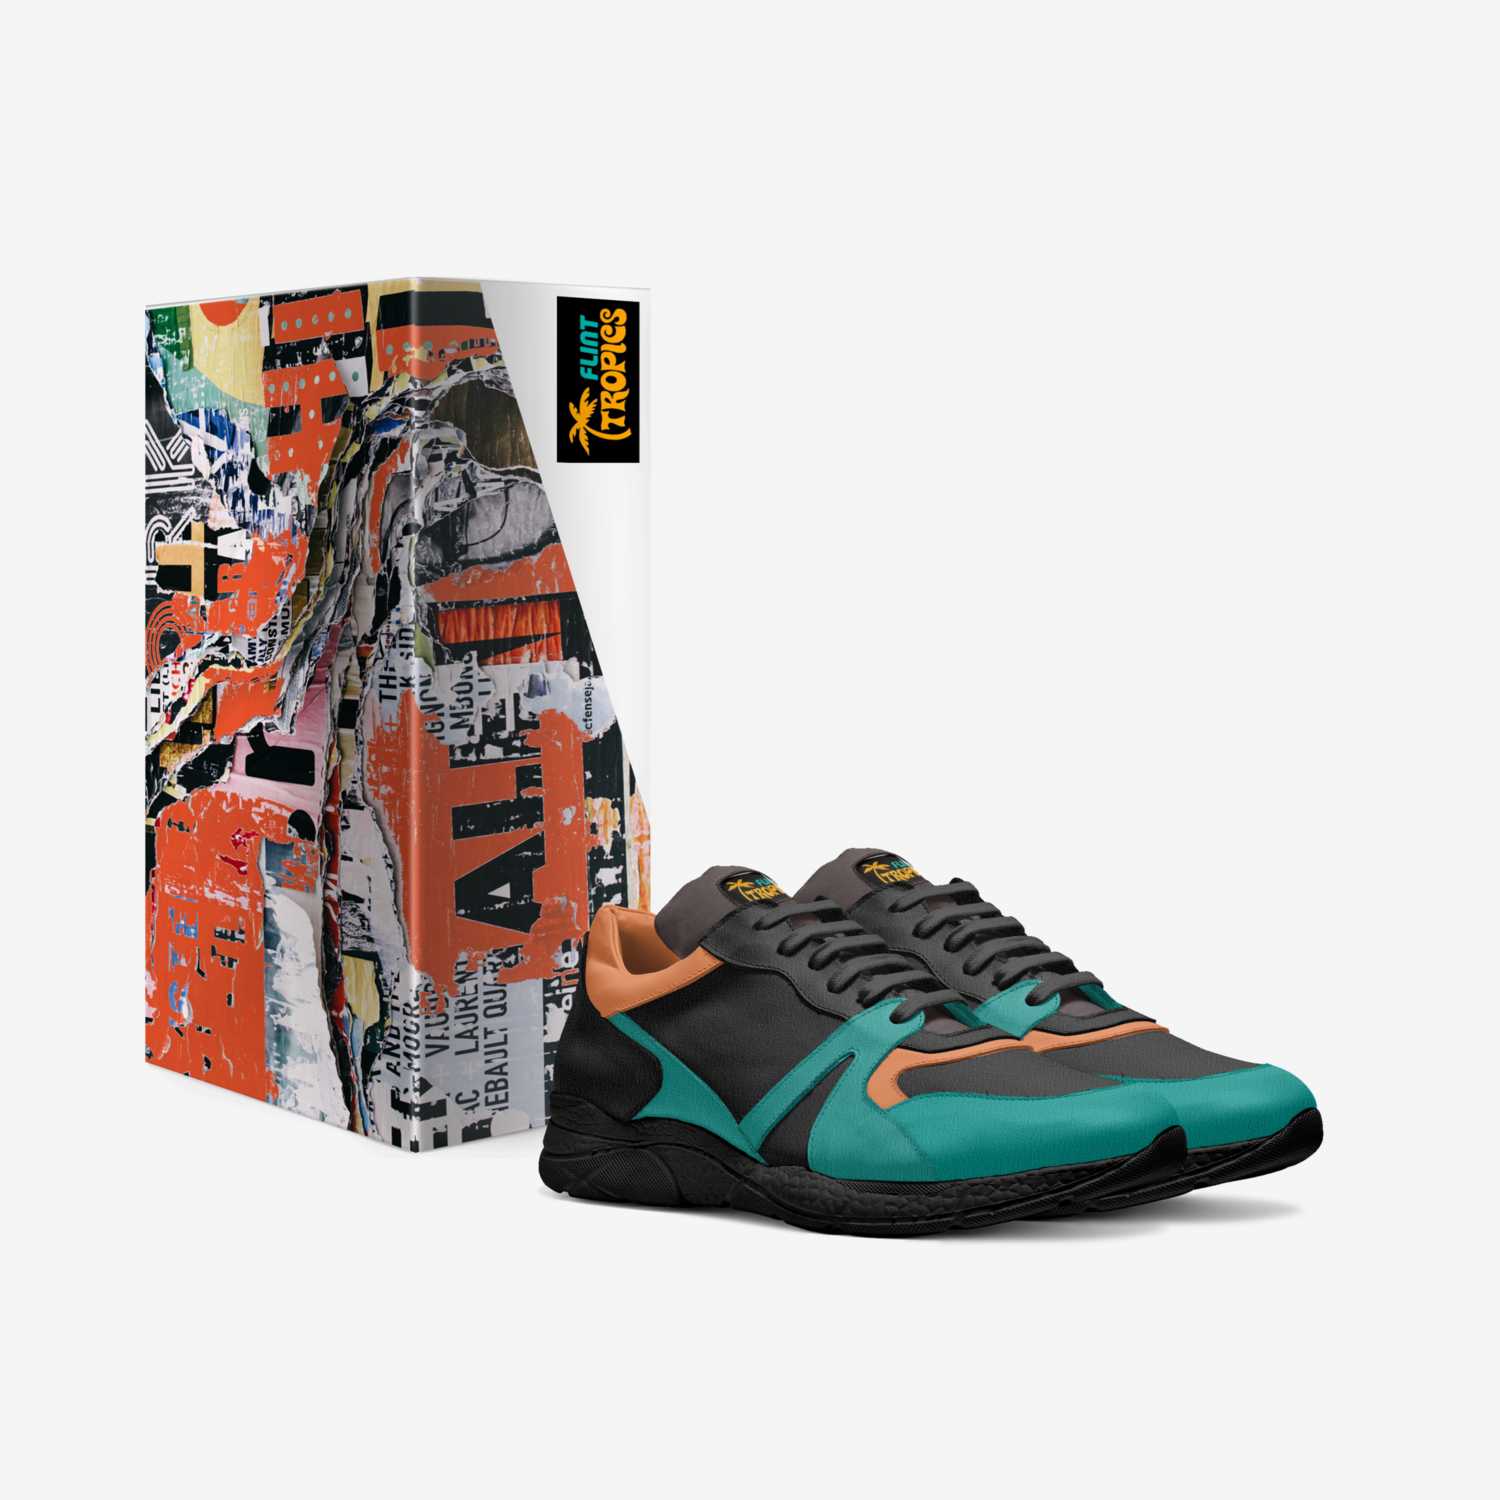 TropicMoon1 custom made in Italy shoes by Mykel D Darrough | Box view